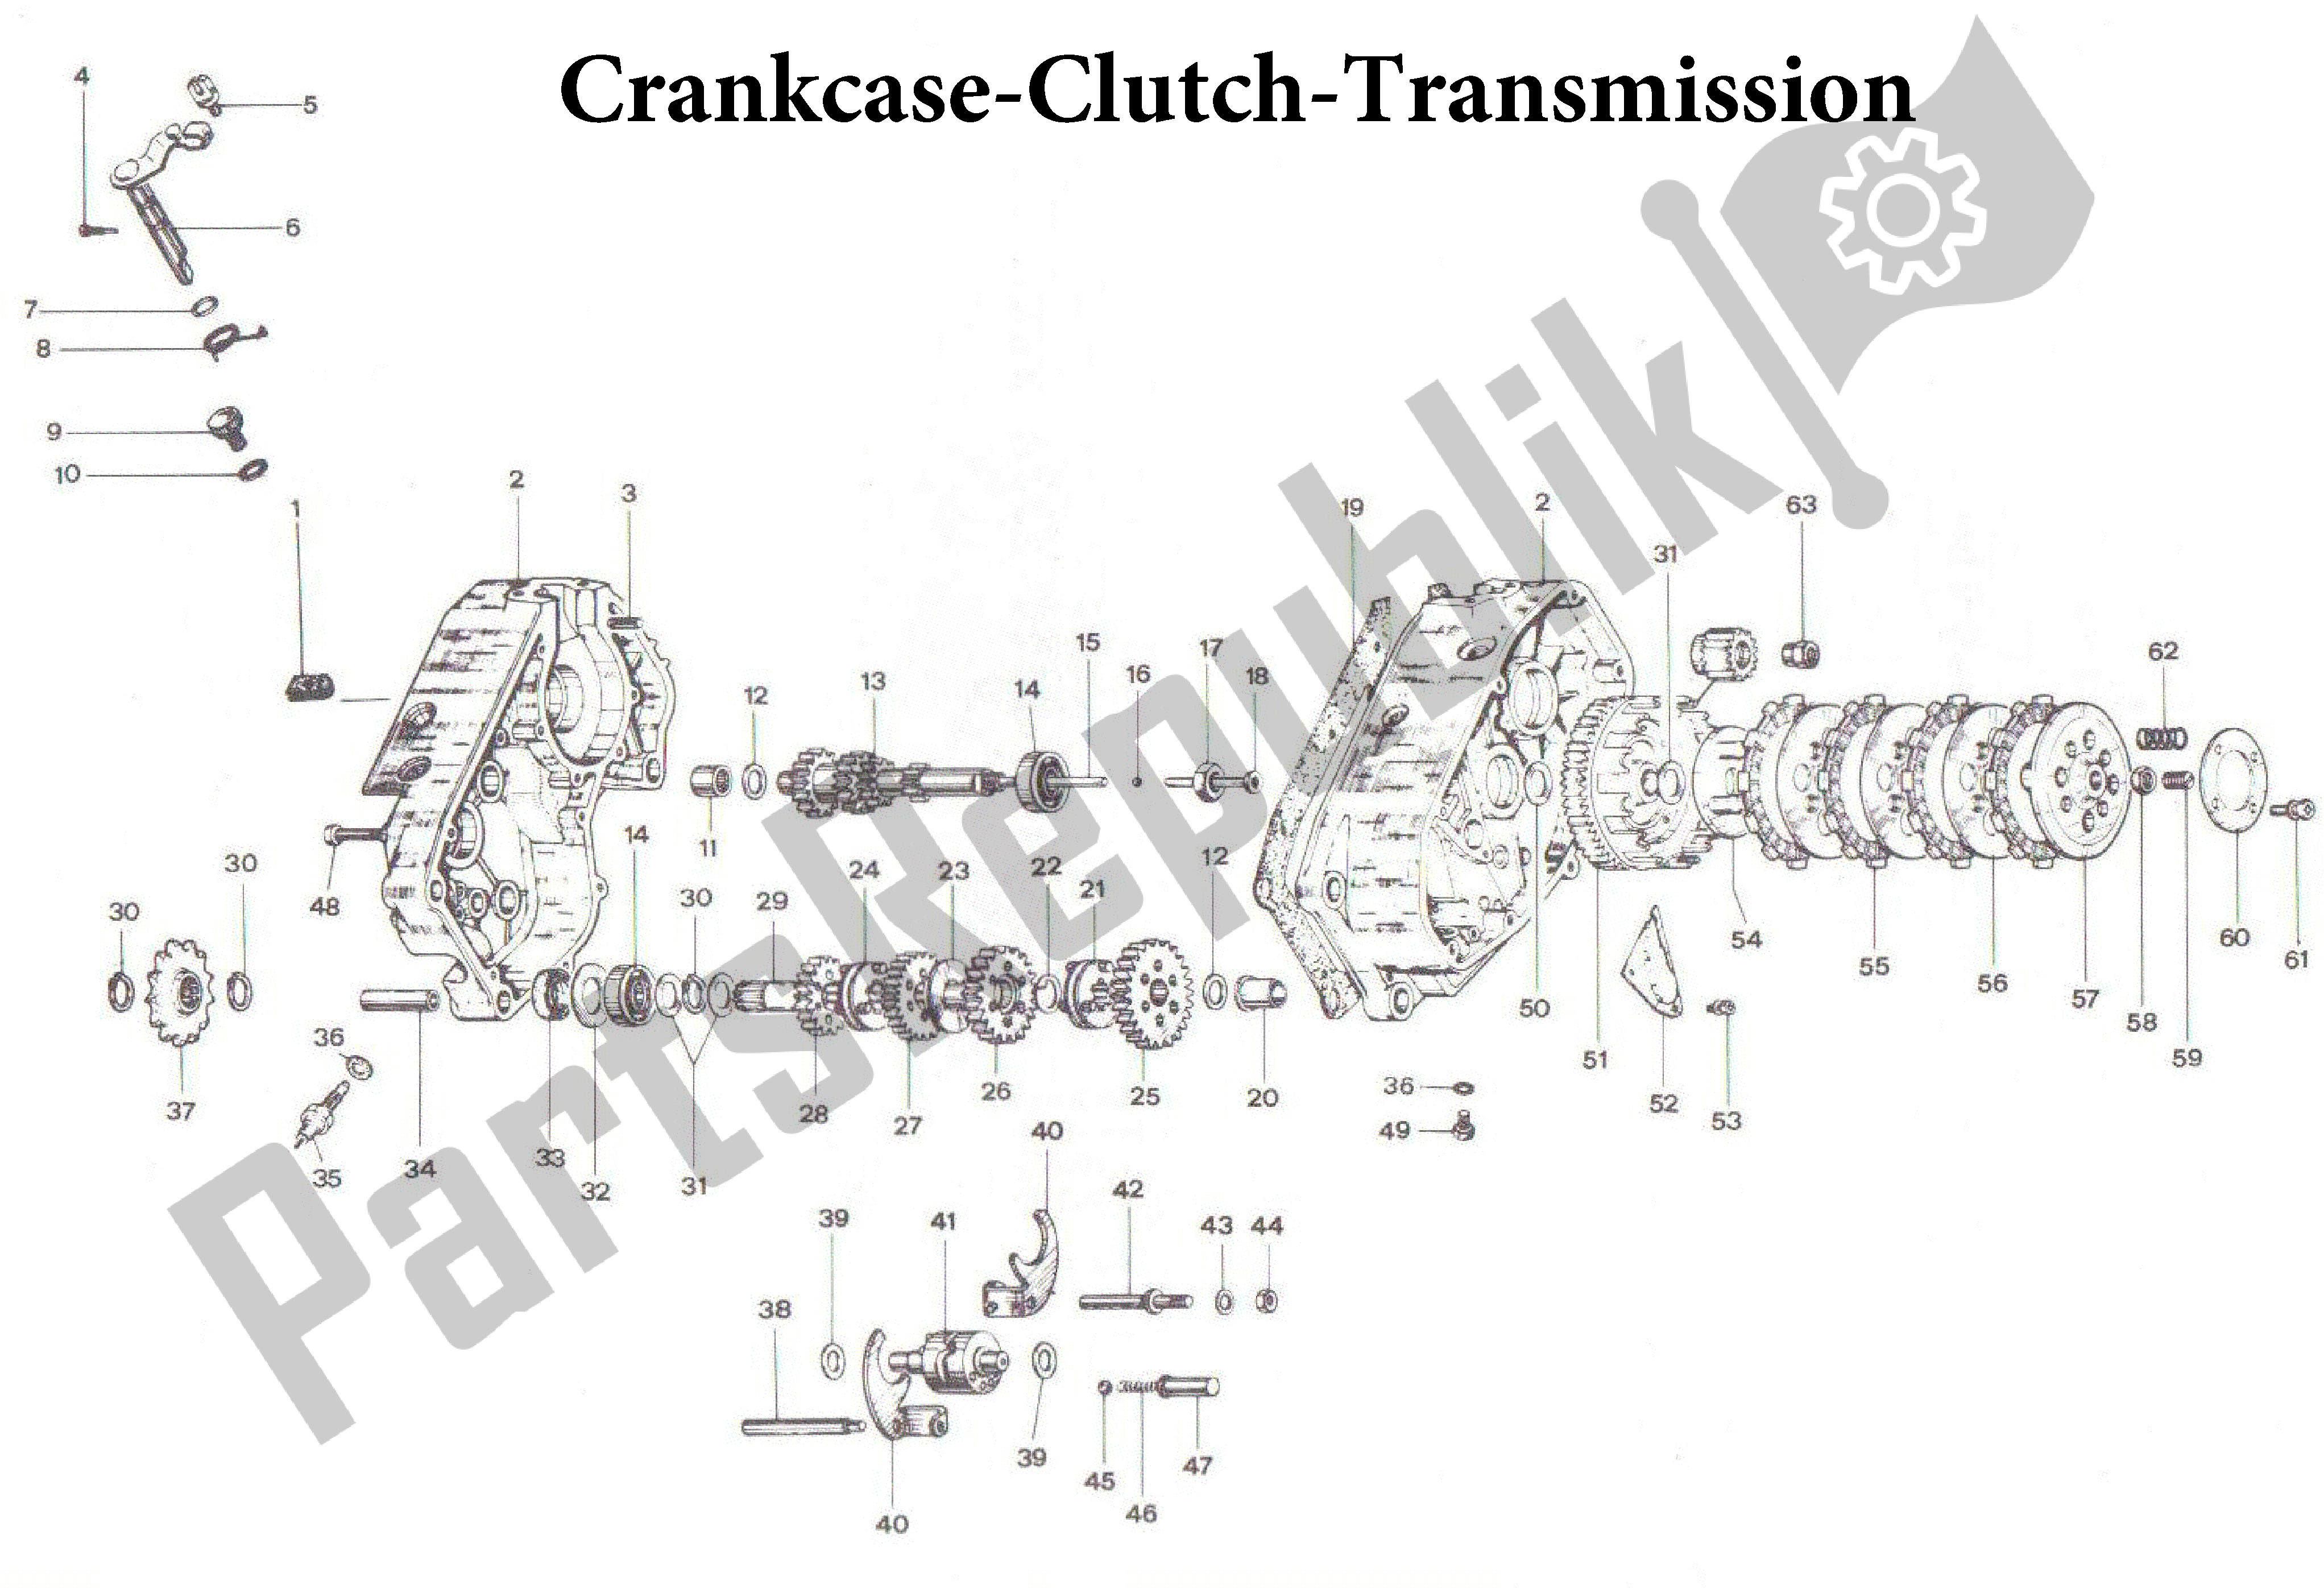 All parts for the Crankcase-clutch-transmission of the Aprilia Scarabeo 50 1998